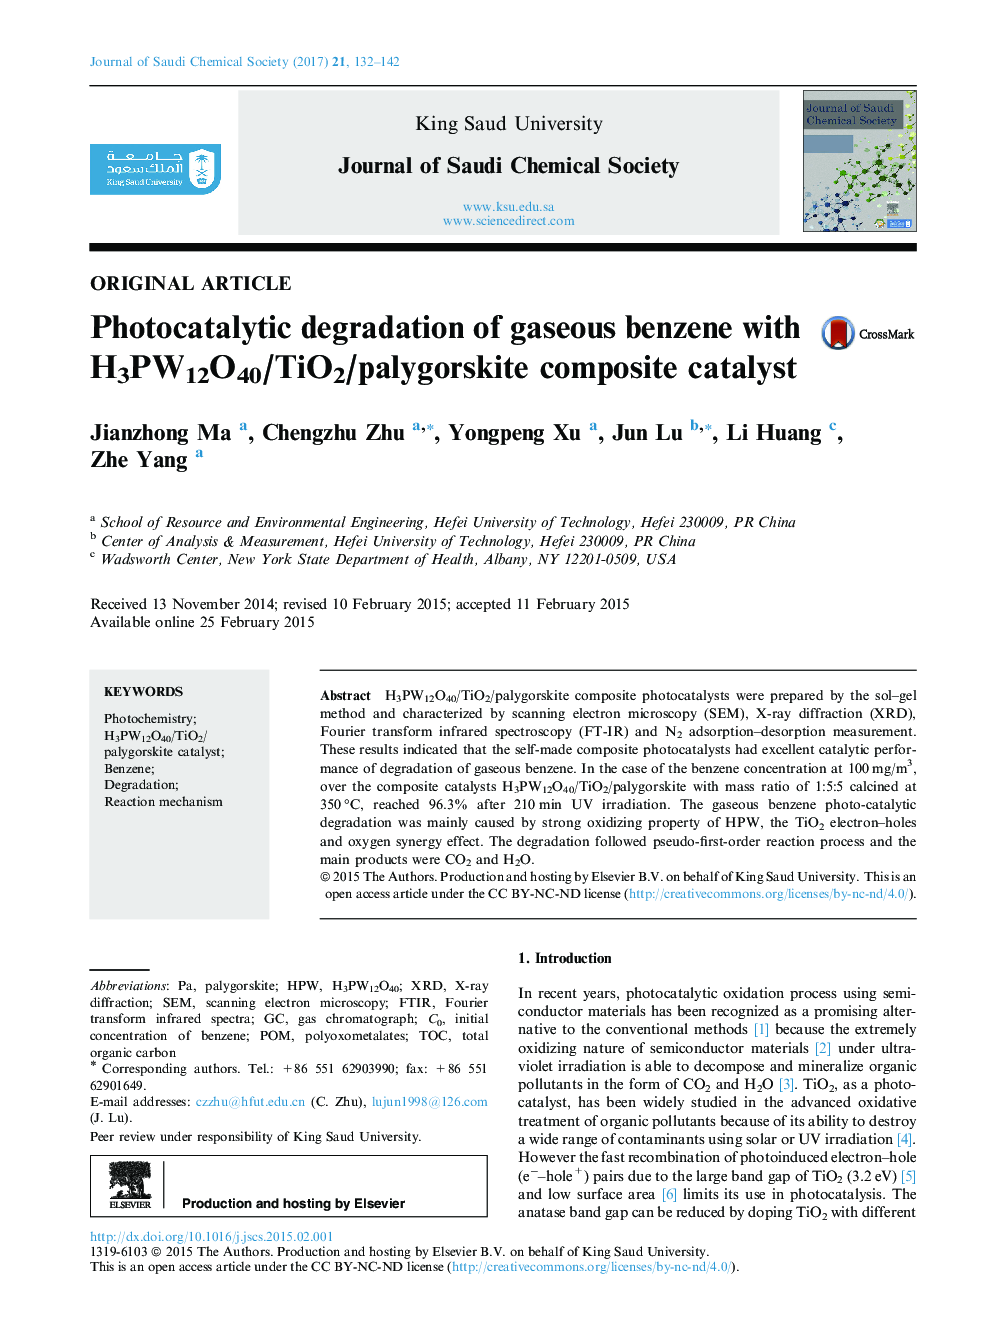 Photocatalytic degradation of gaseous benzene with H3PW12O40/TiO2/palygorskite composite catalyst